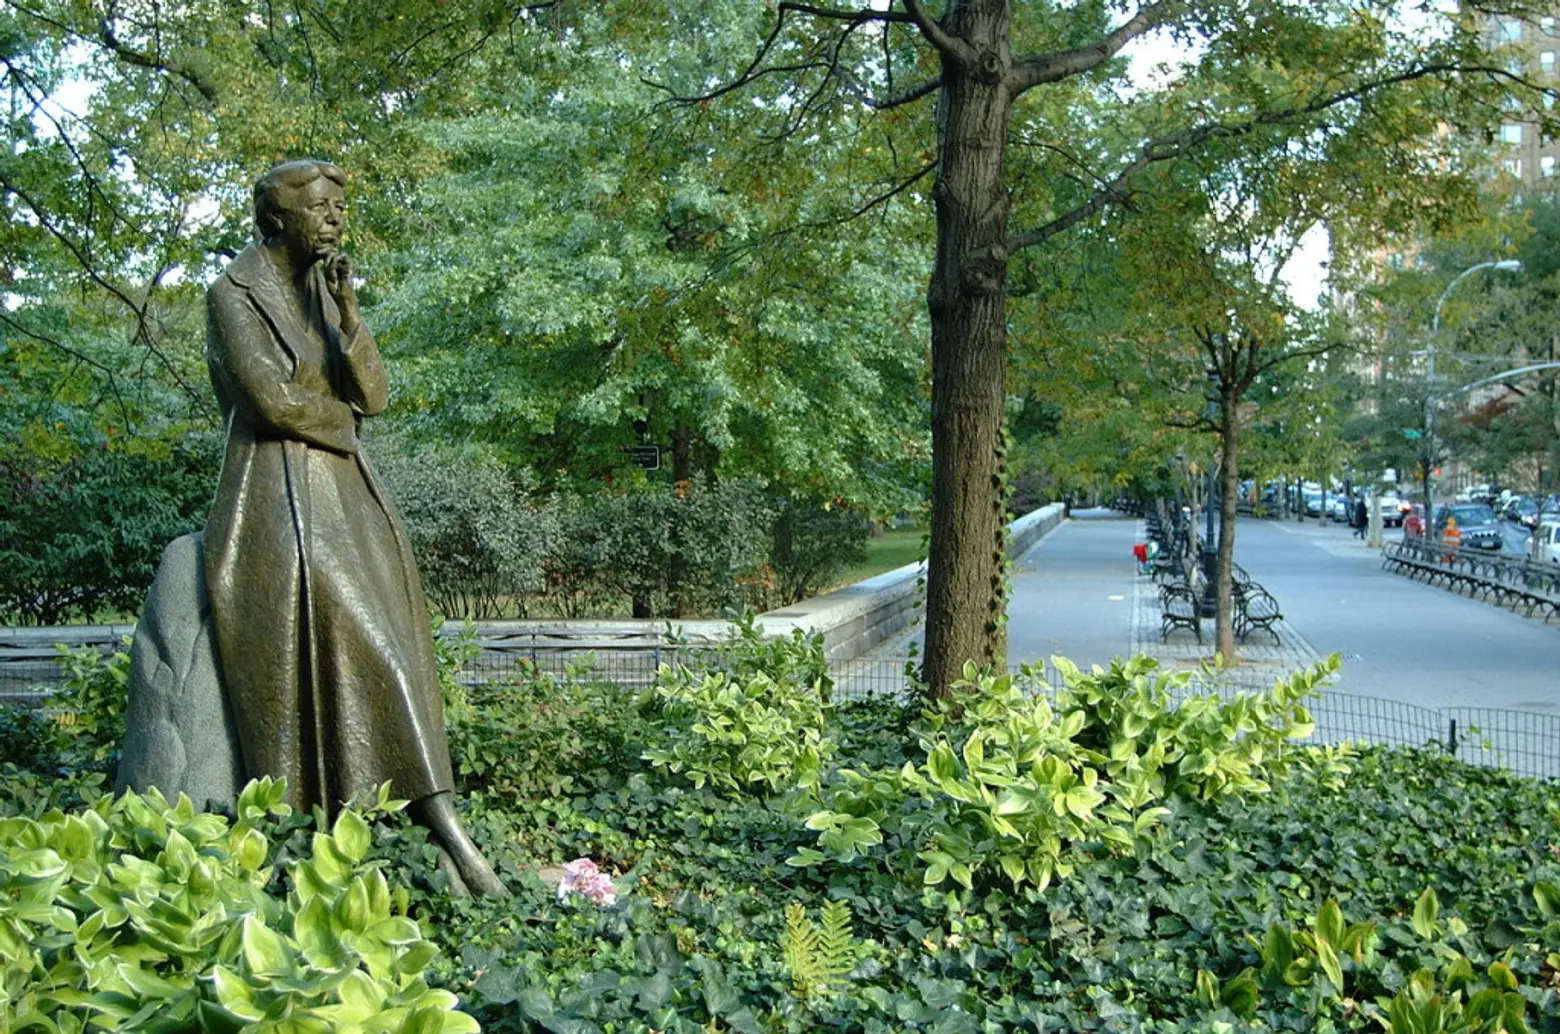 The city wants you to nominate historic NYC women who deserve a public monument